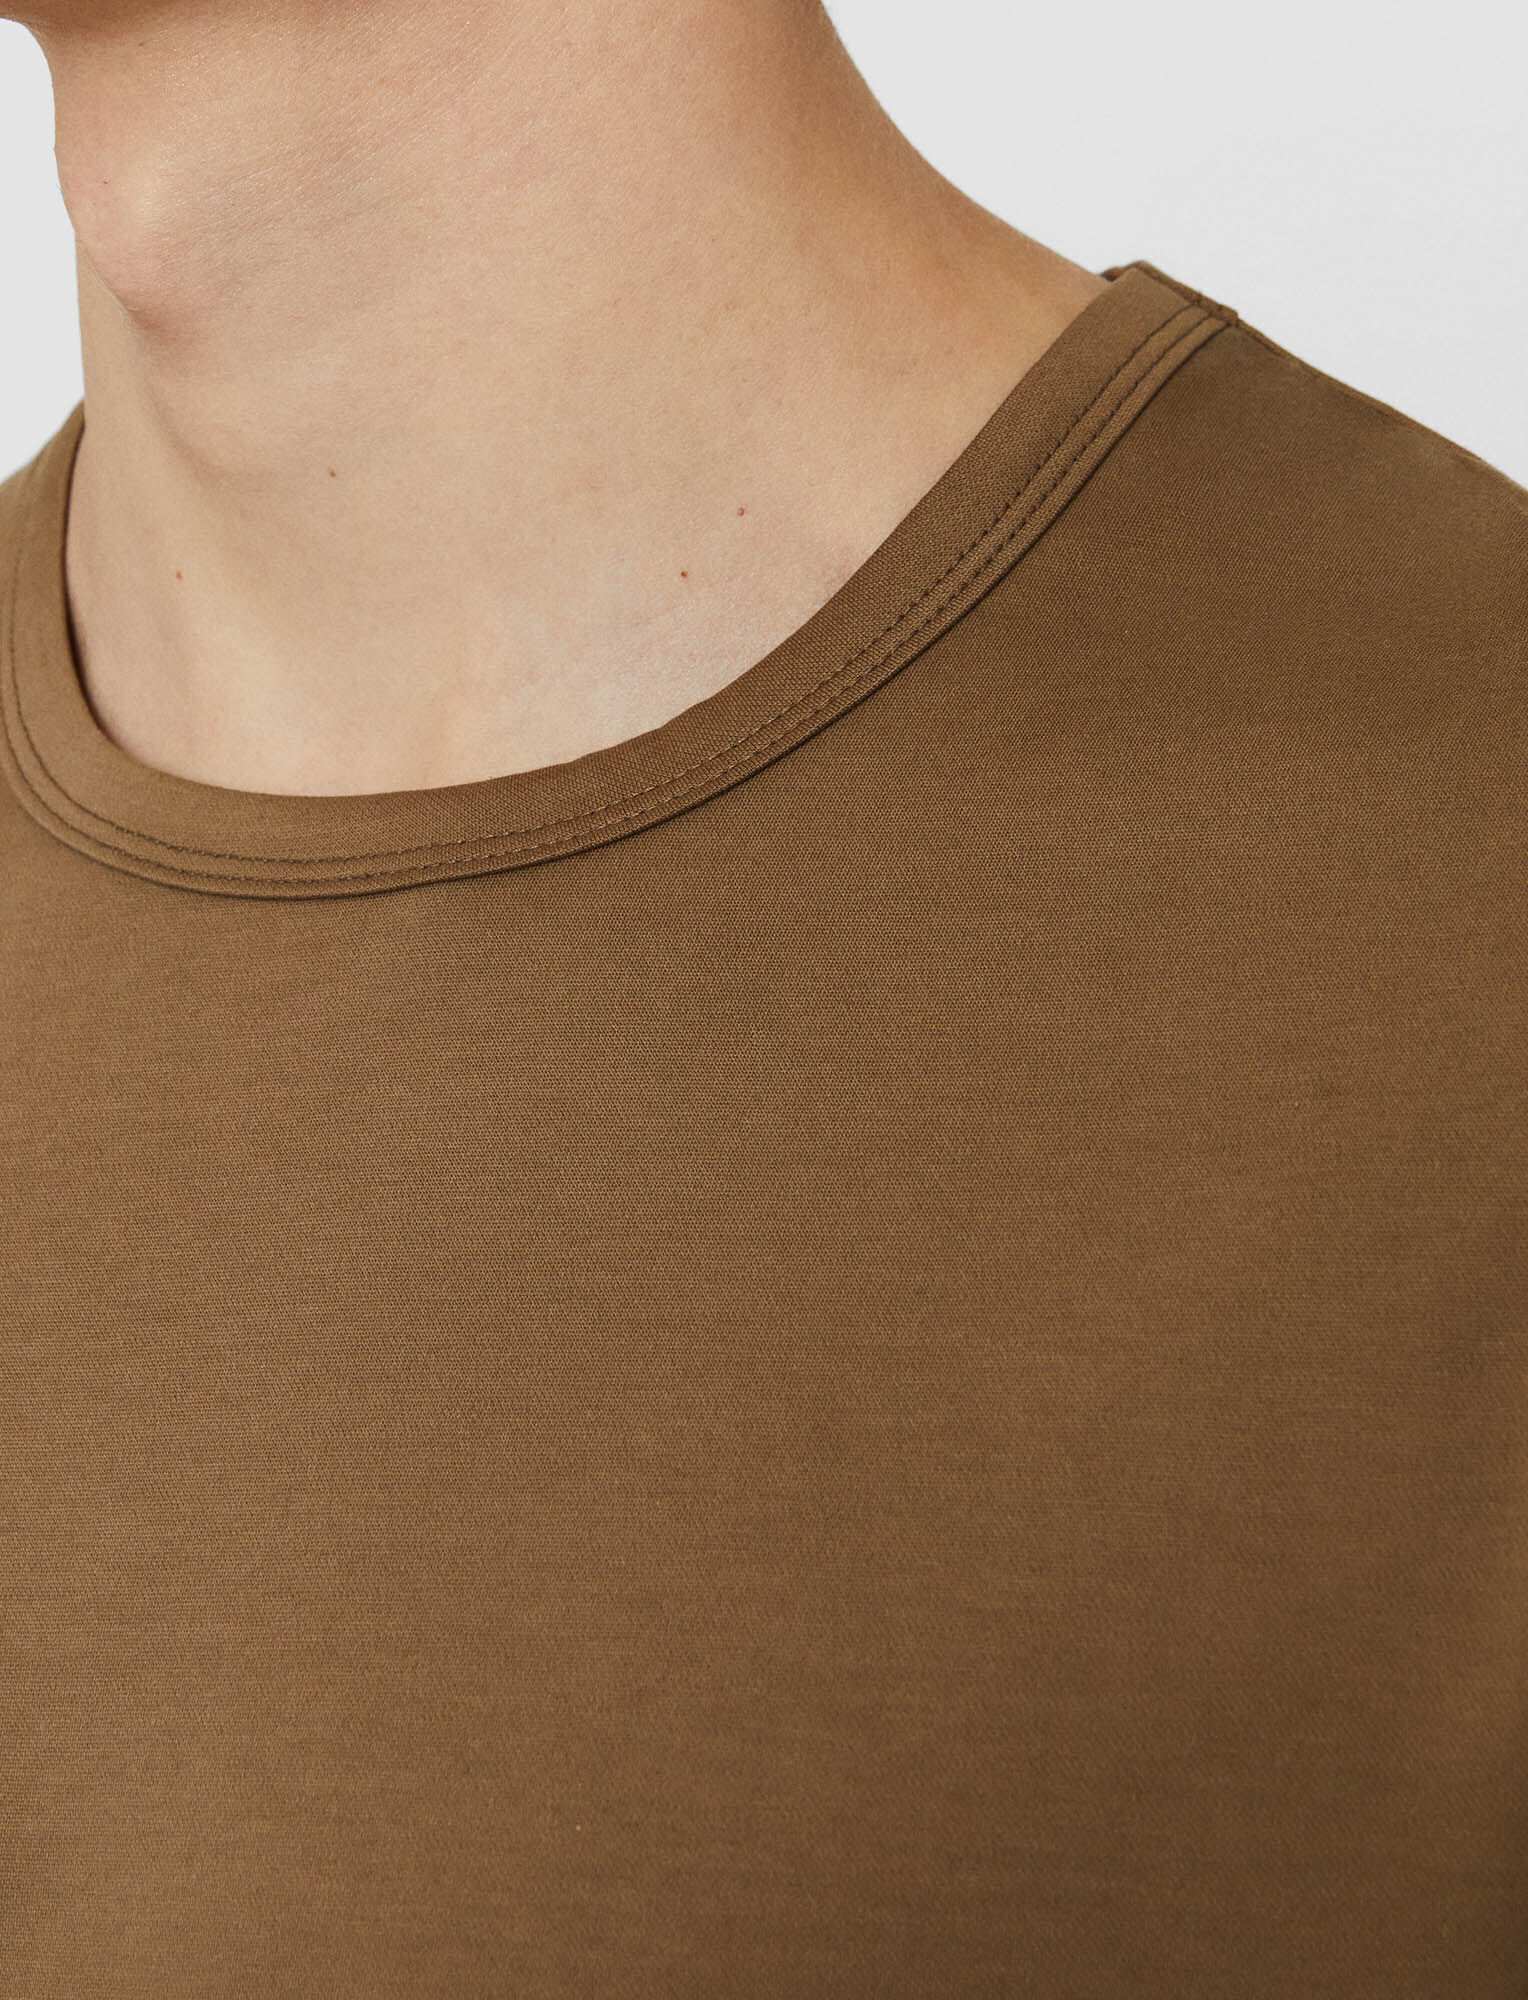 Joseph, Suvin Soft Jersey Top, in Camel